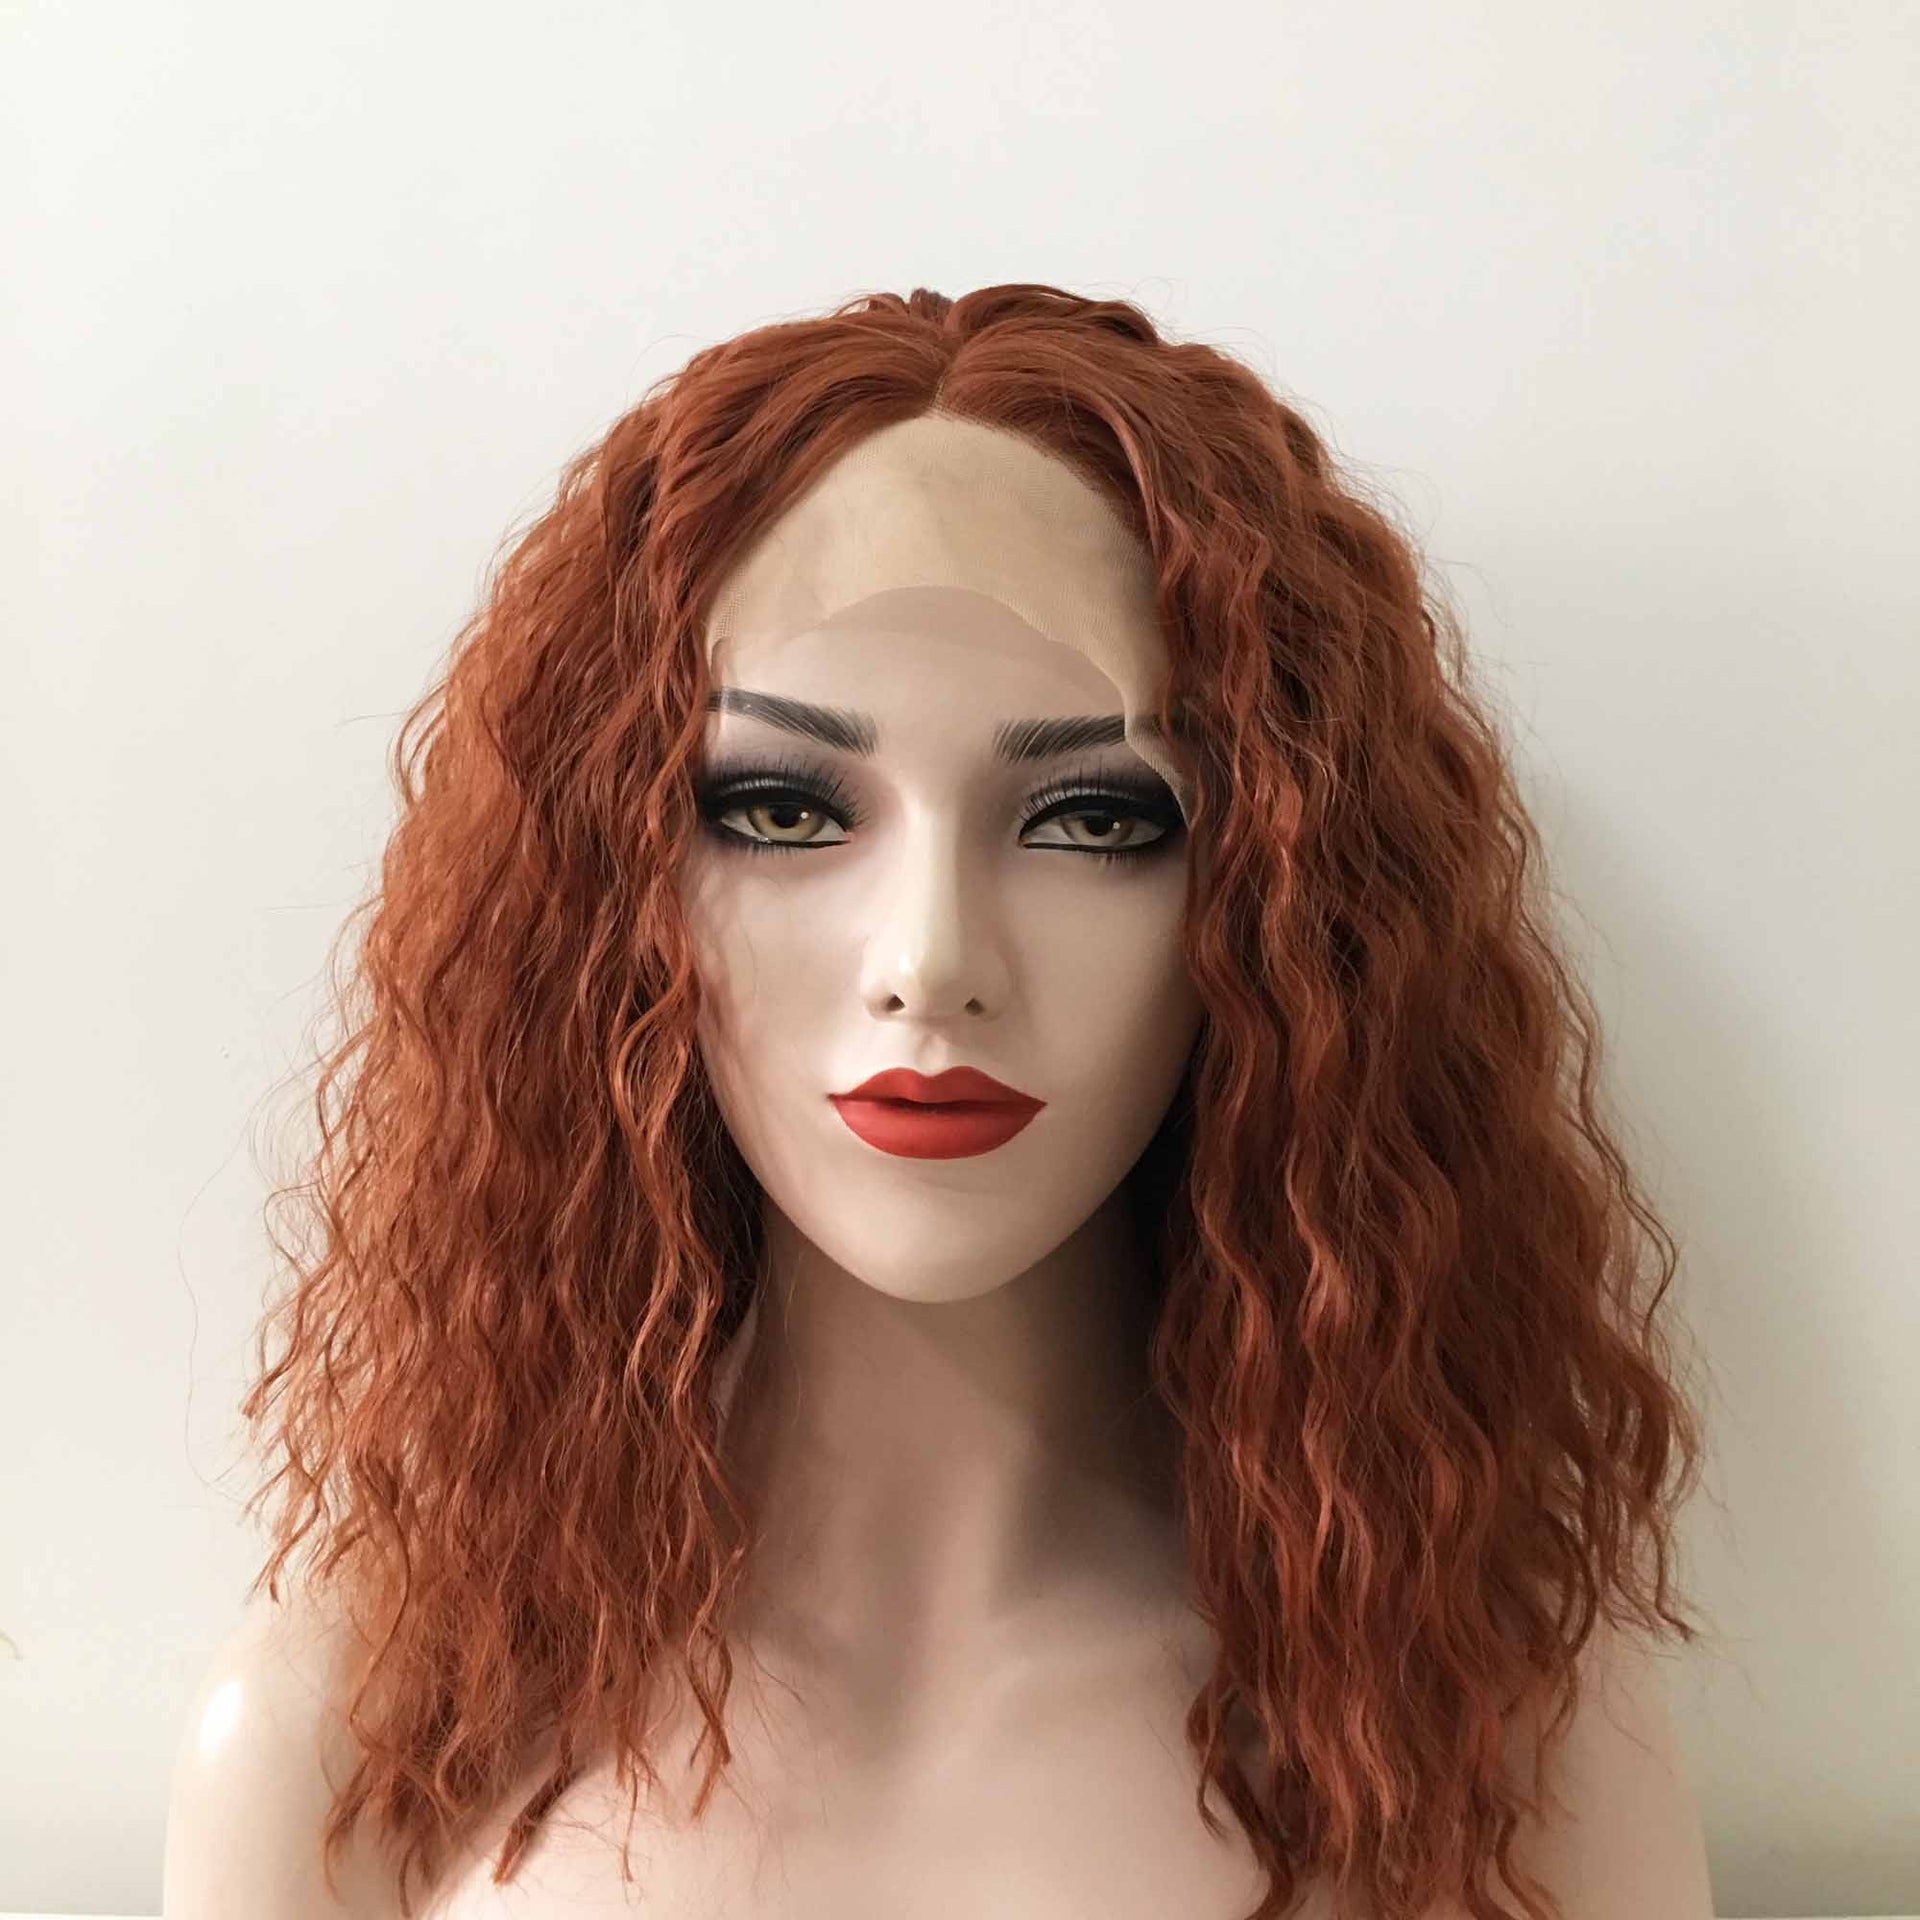 nevermindyrhead Women Auburn Brown Lace Front Middle Part Messy Curly Thick Hair Wig